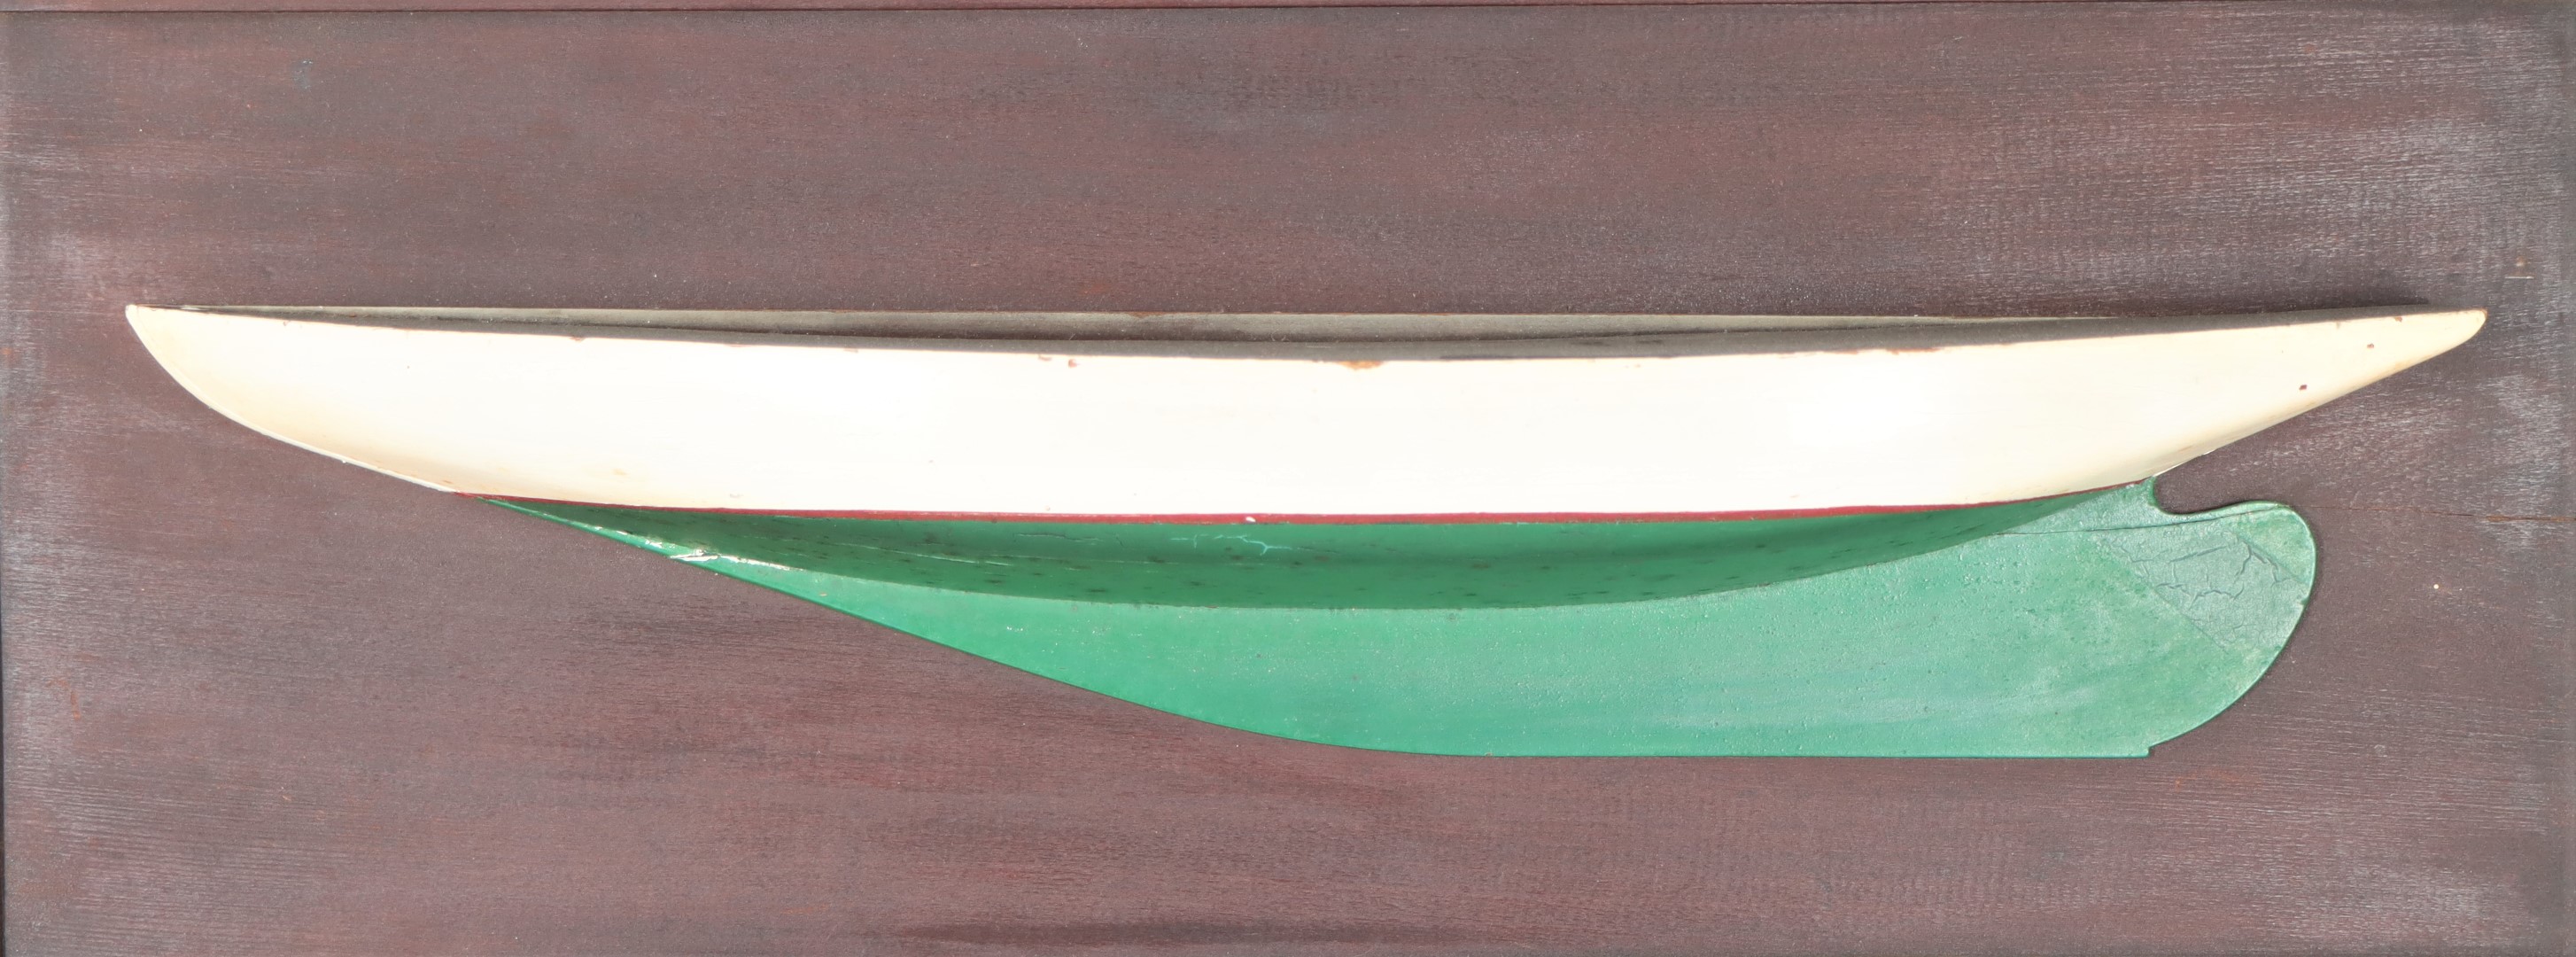 Mounted Wooden Half Boat Hull - Image 3 of 6